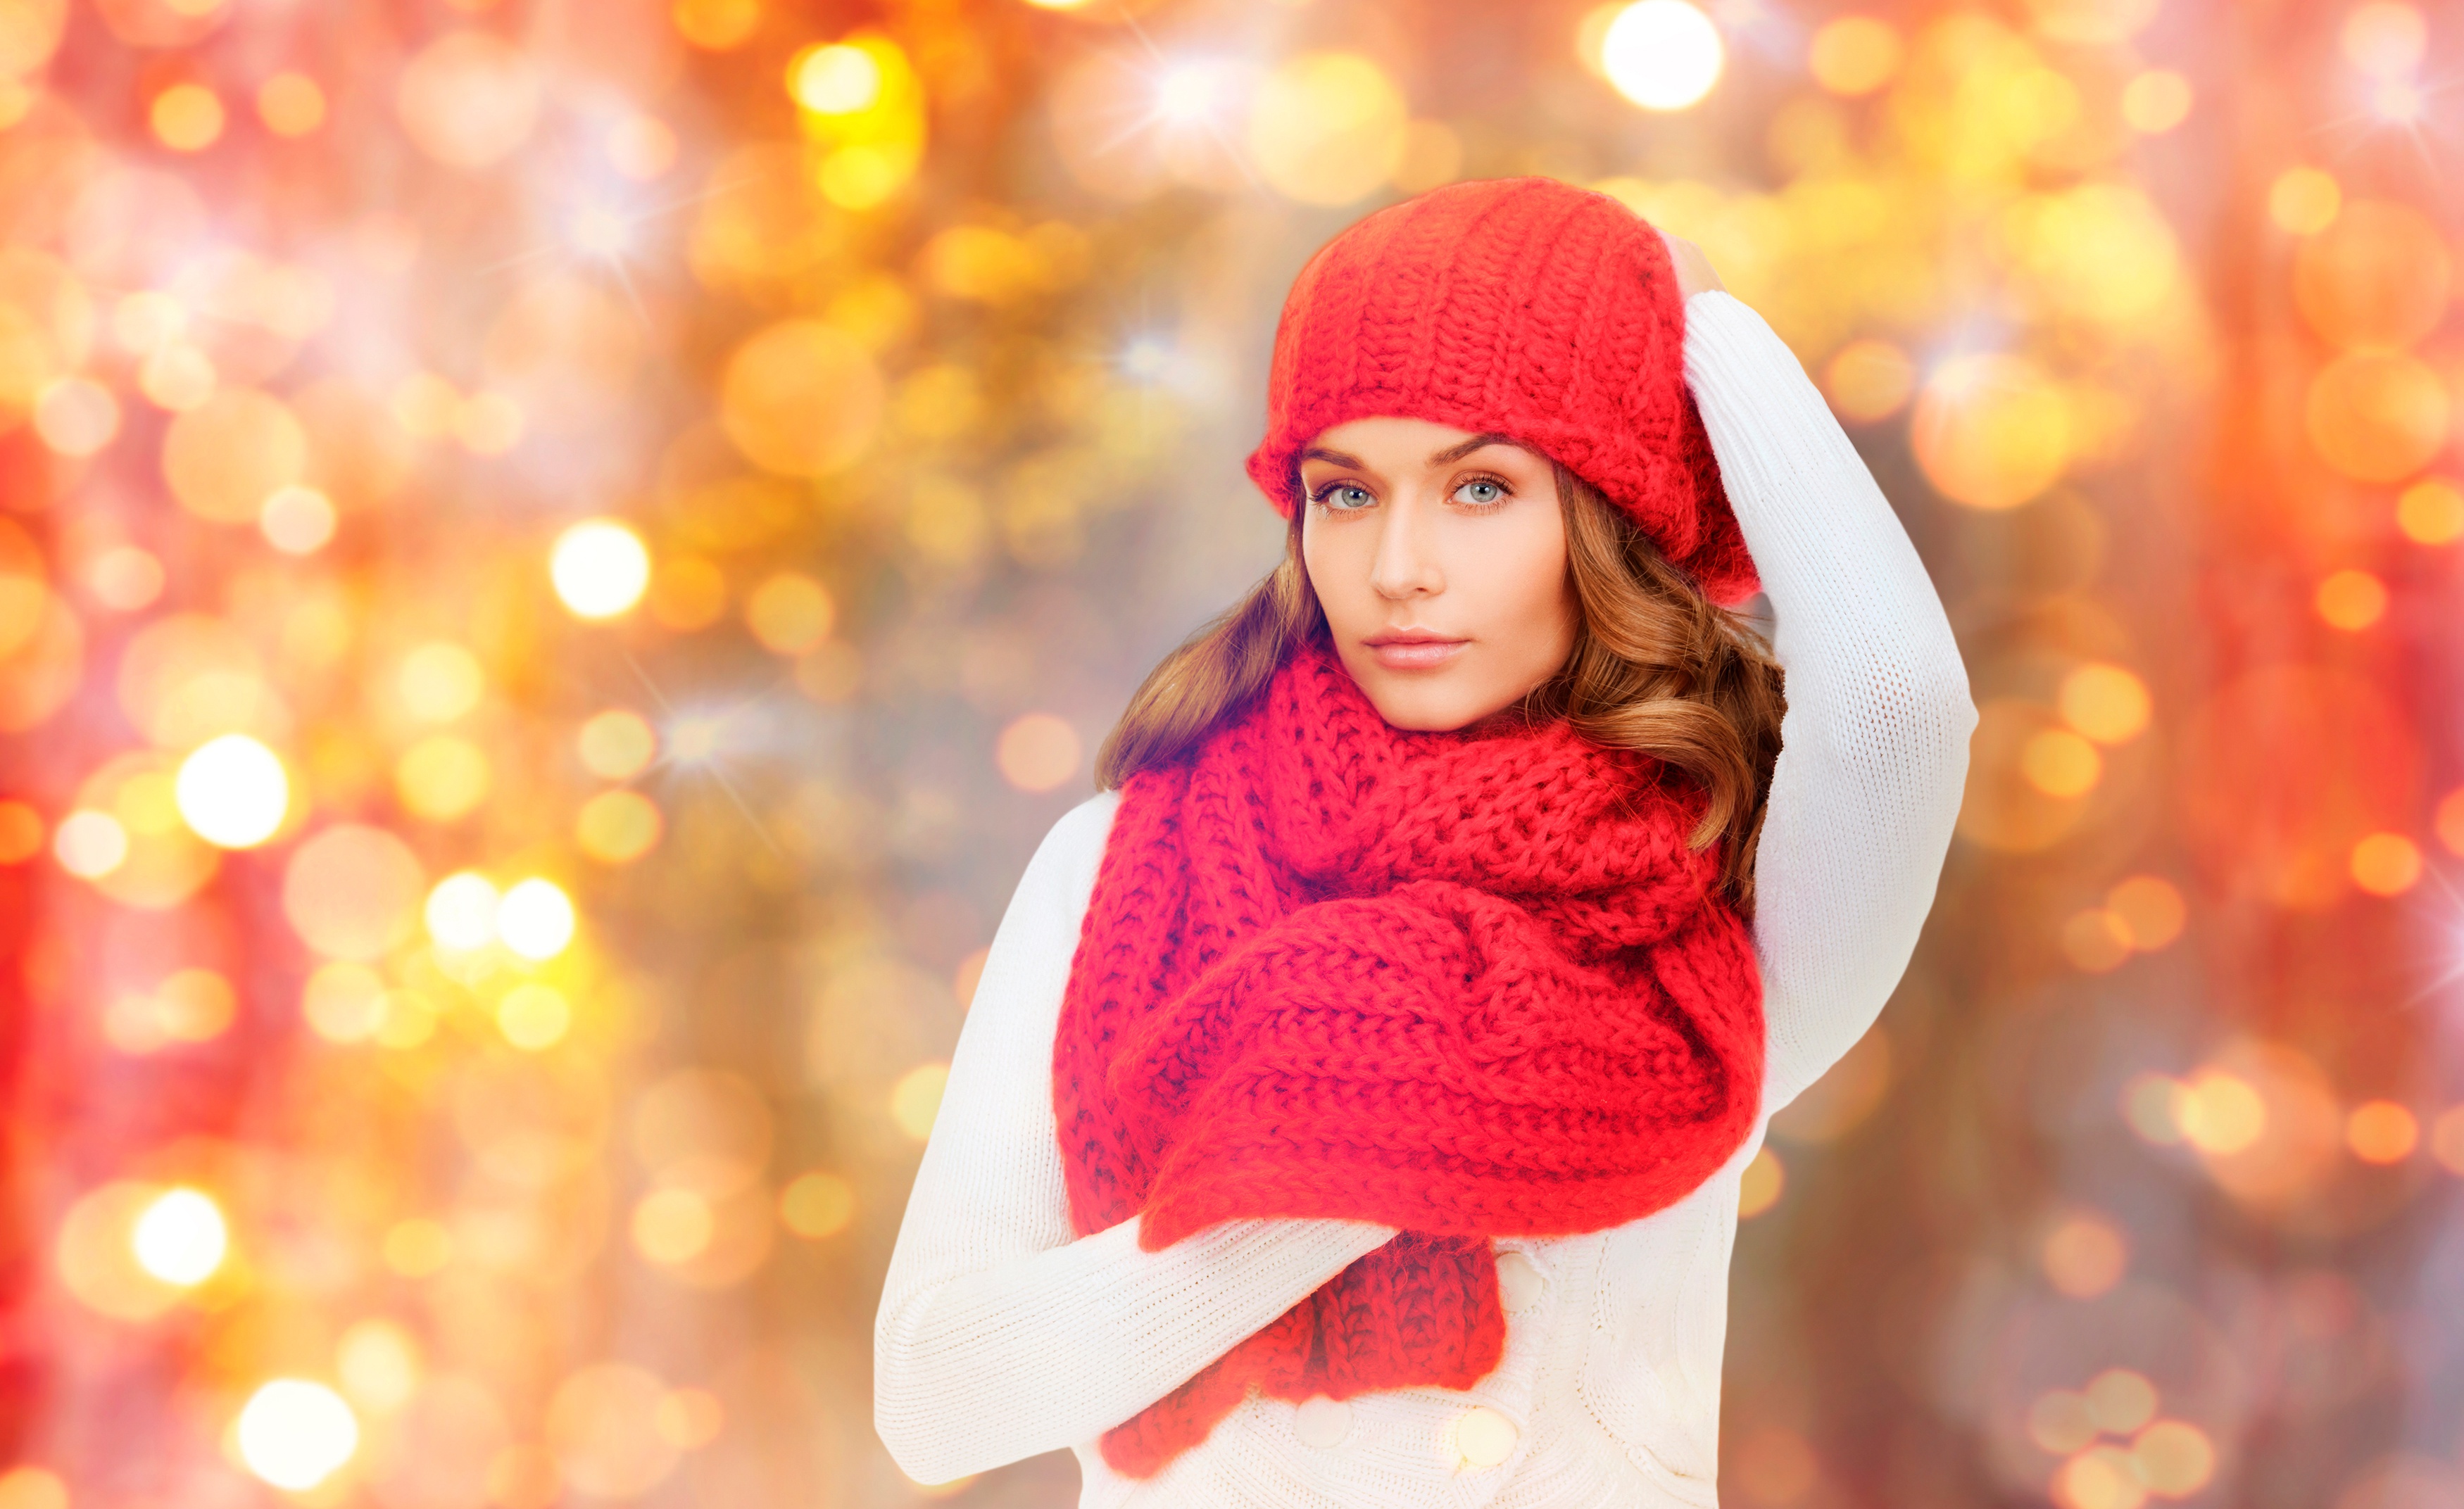 Women Model Redhead Scarf Wool Hat Sweater White Sweater Hands On Head Looking At Viewer Wool Cap 3500x2144